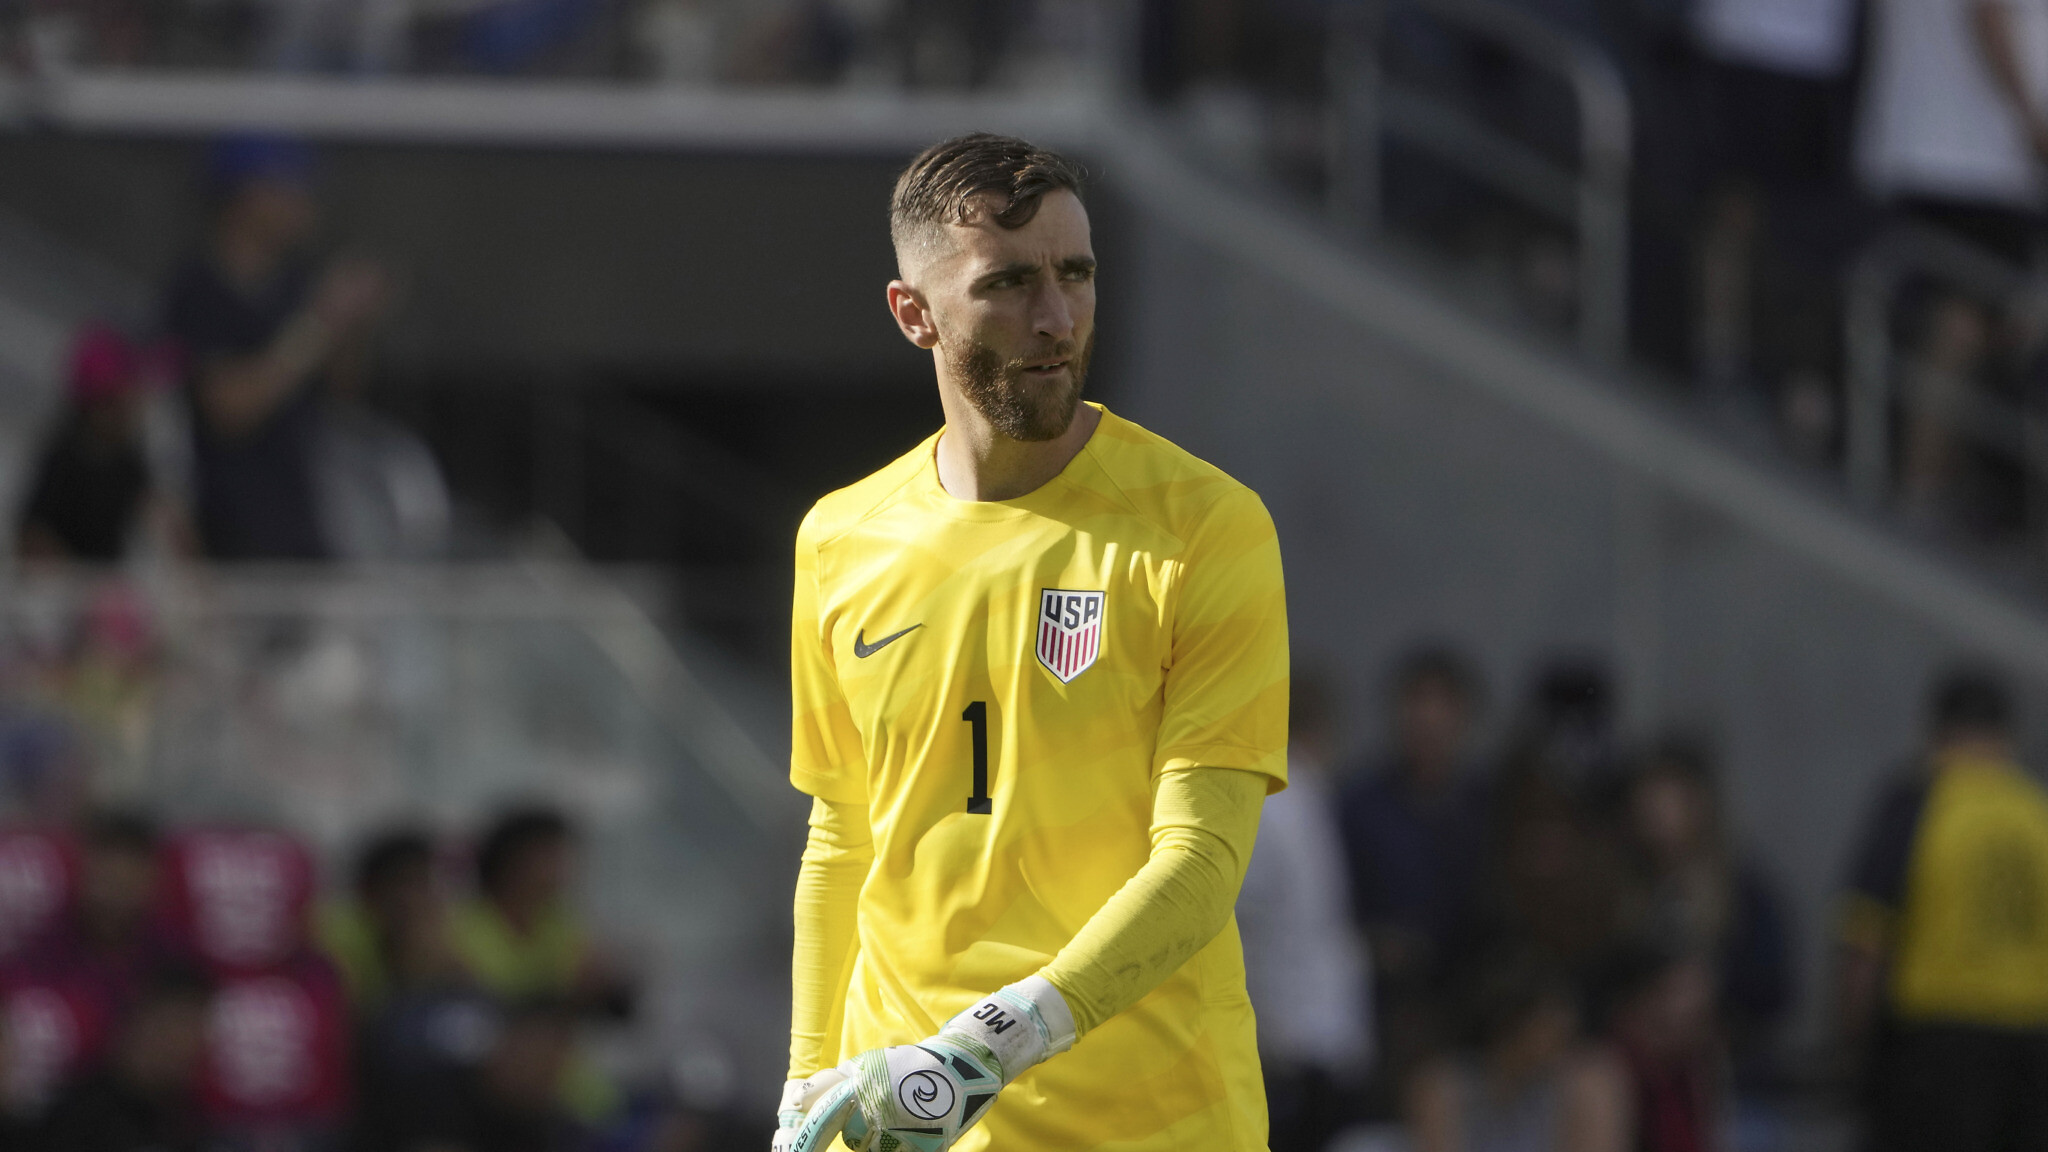 A chance discovery connects US soccer star Matt Turner to his Jewish roots